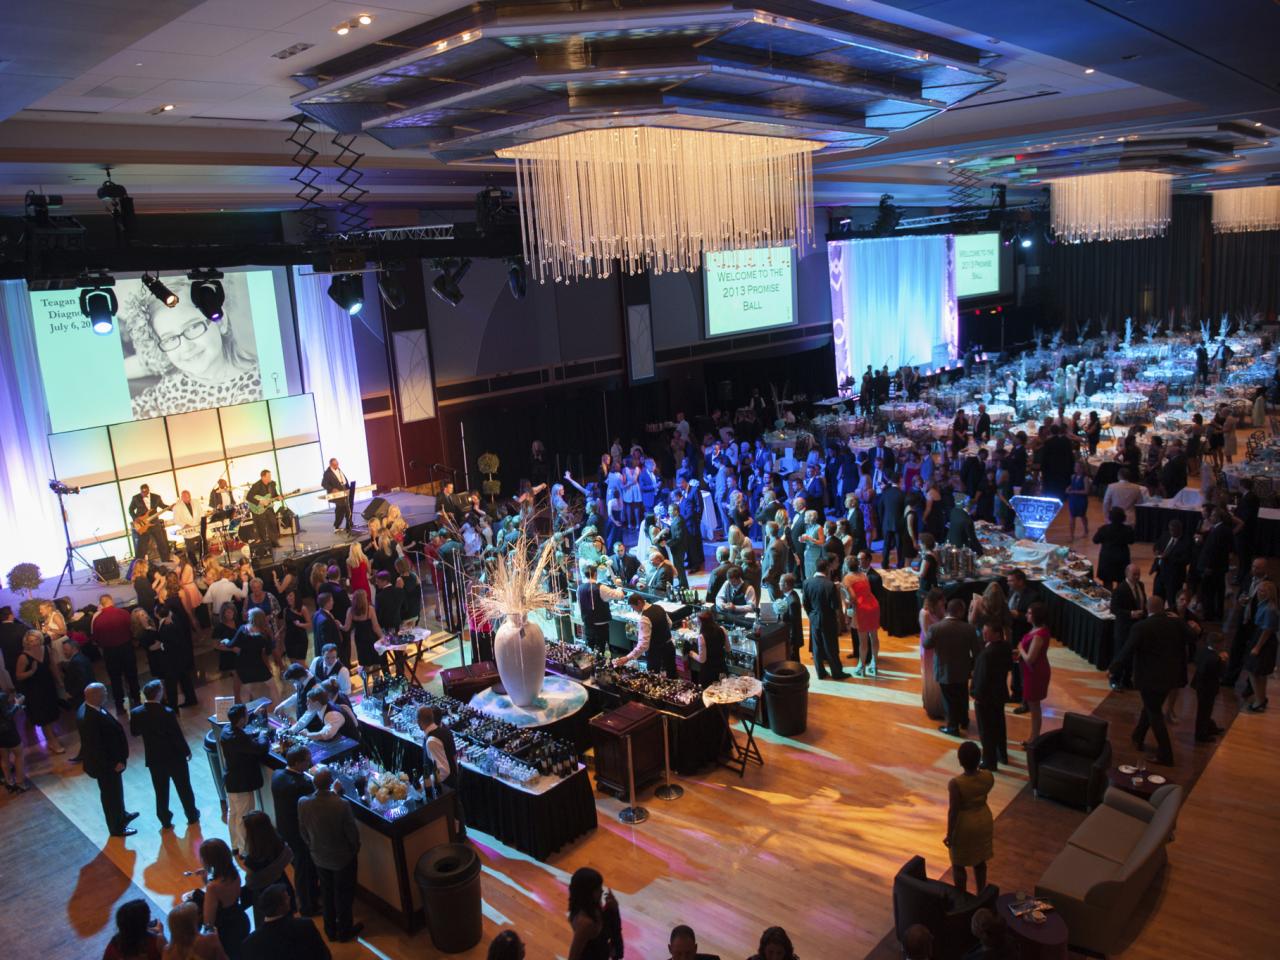 Gala special event in the Archie M. Griffin Grand Ballroom - 17, 539 sq. ft.